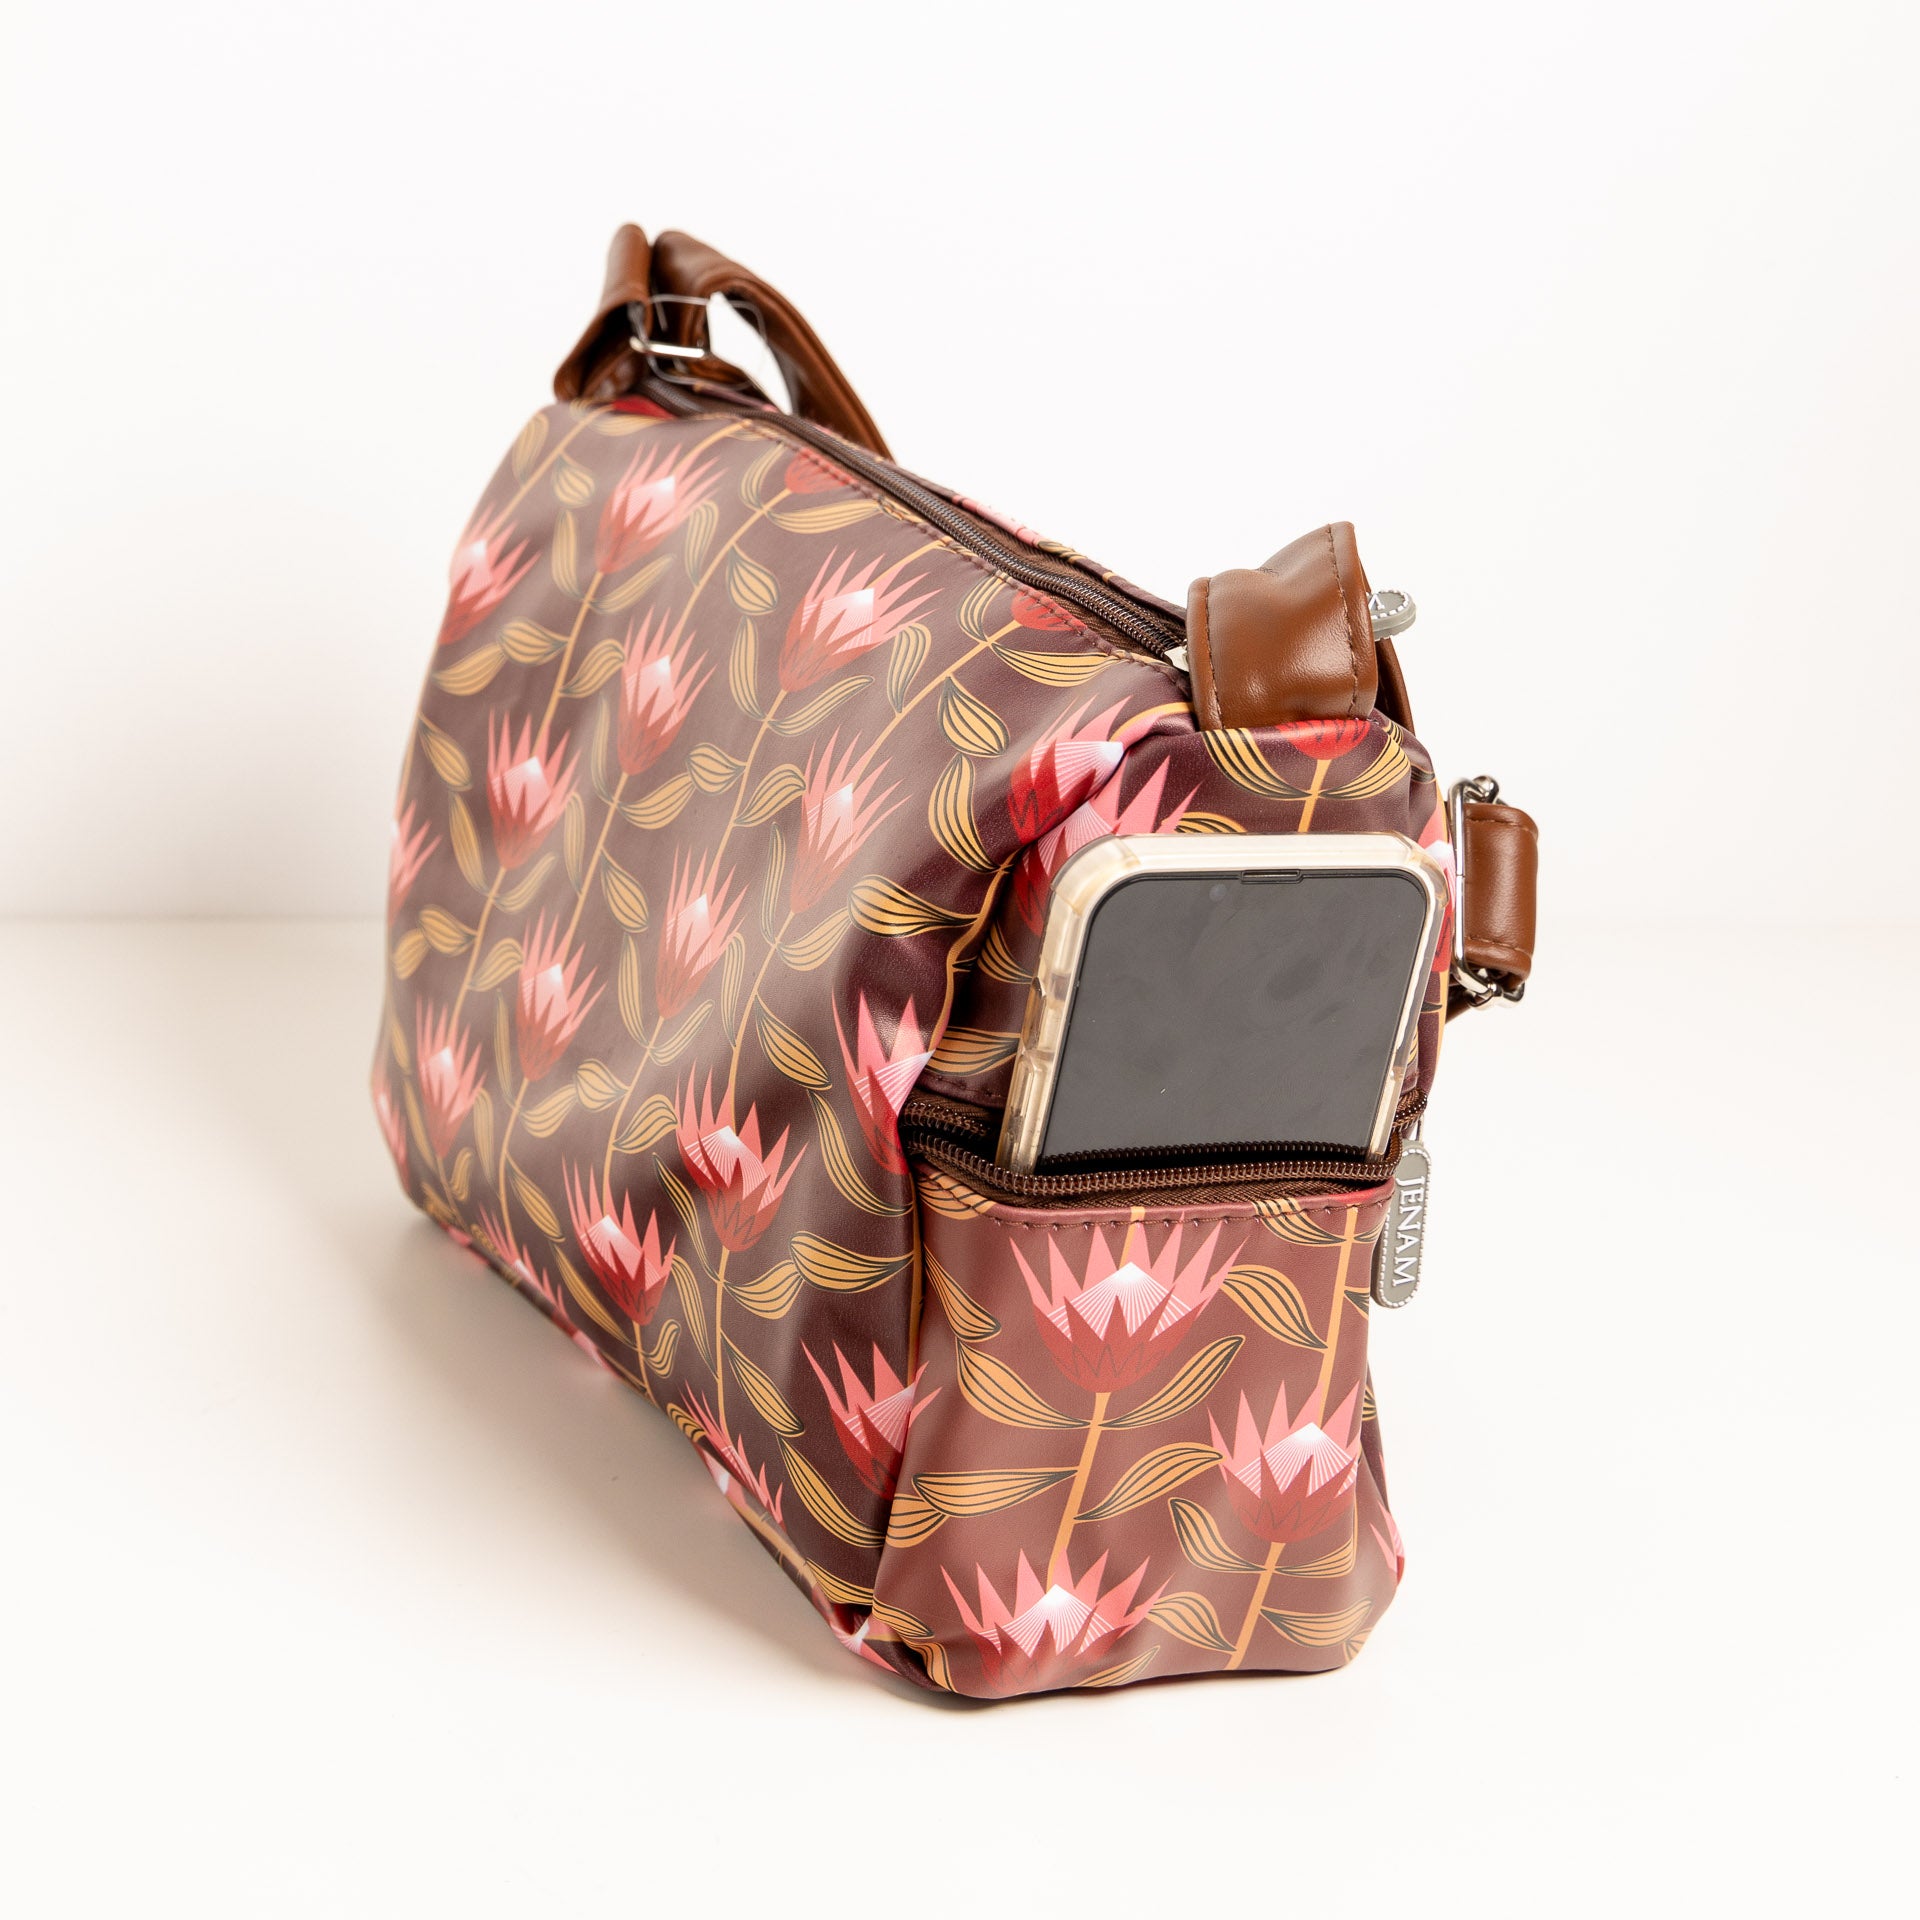 Out of Africa - Protea Print Bags & Accessories (assorted styles)